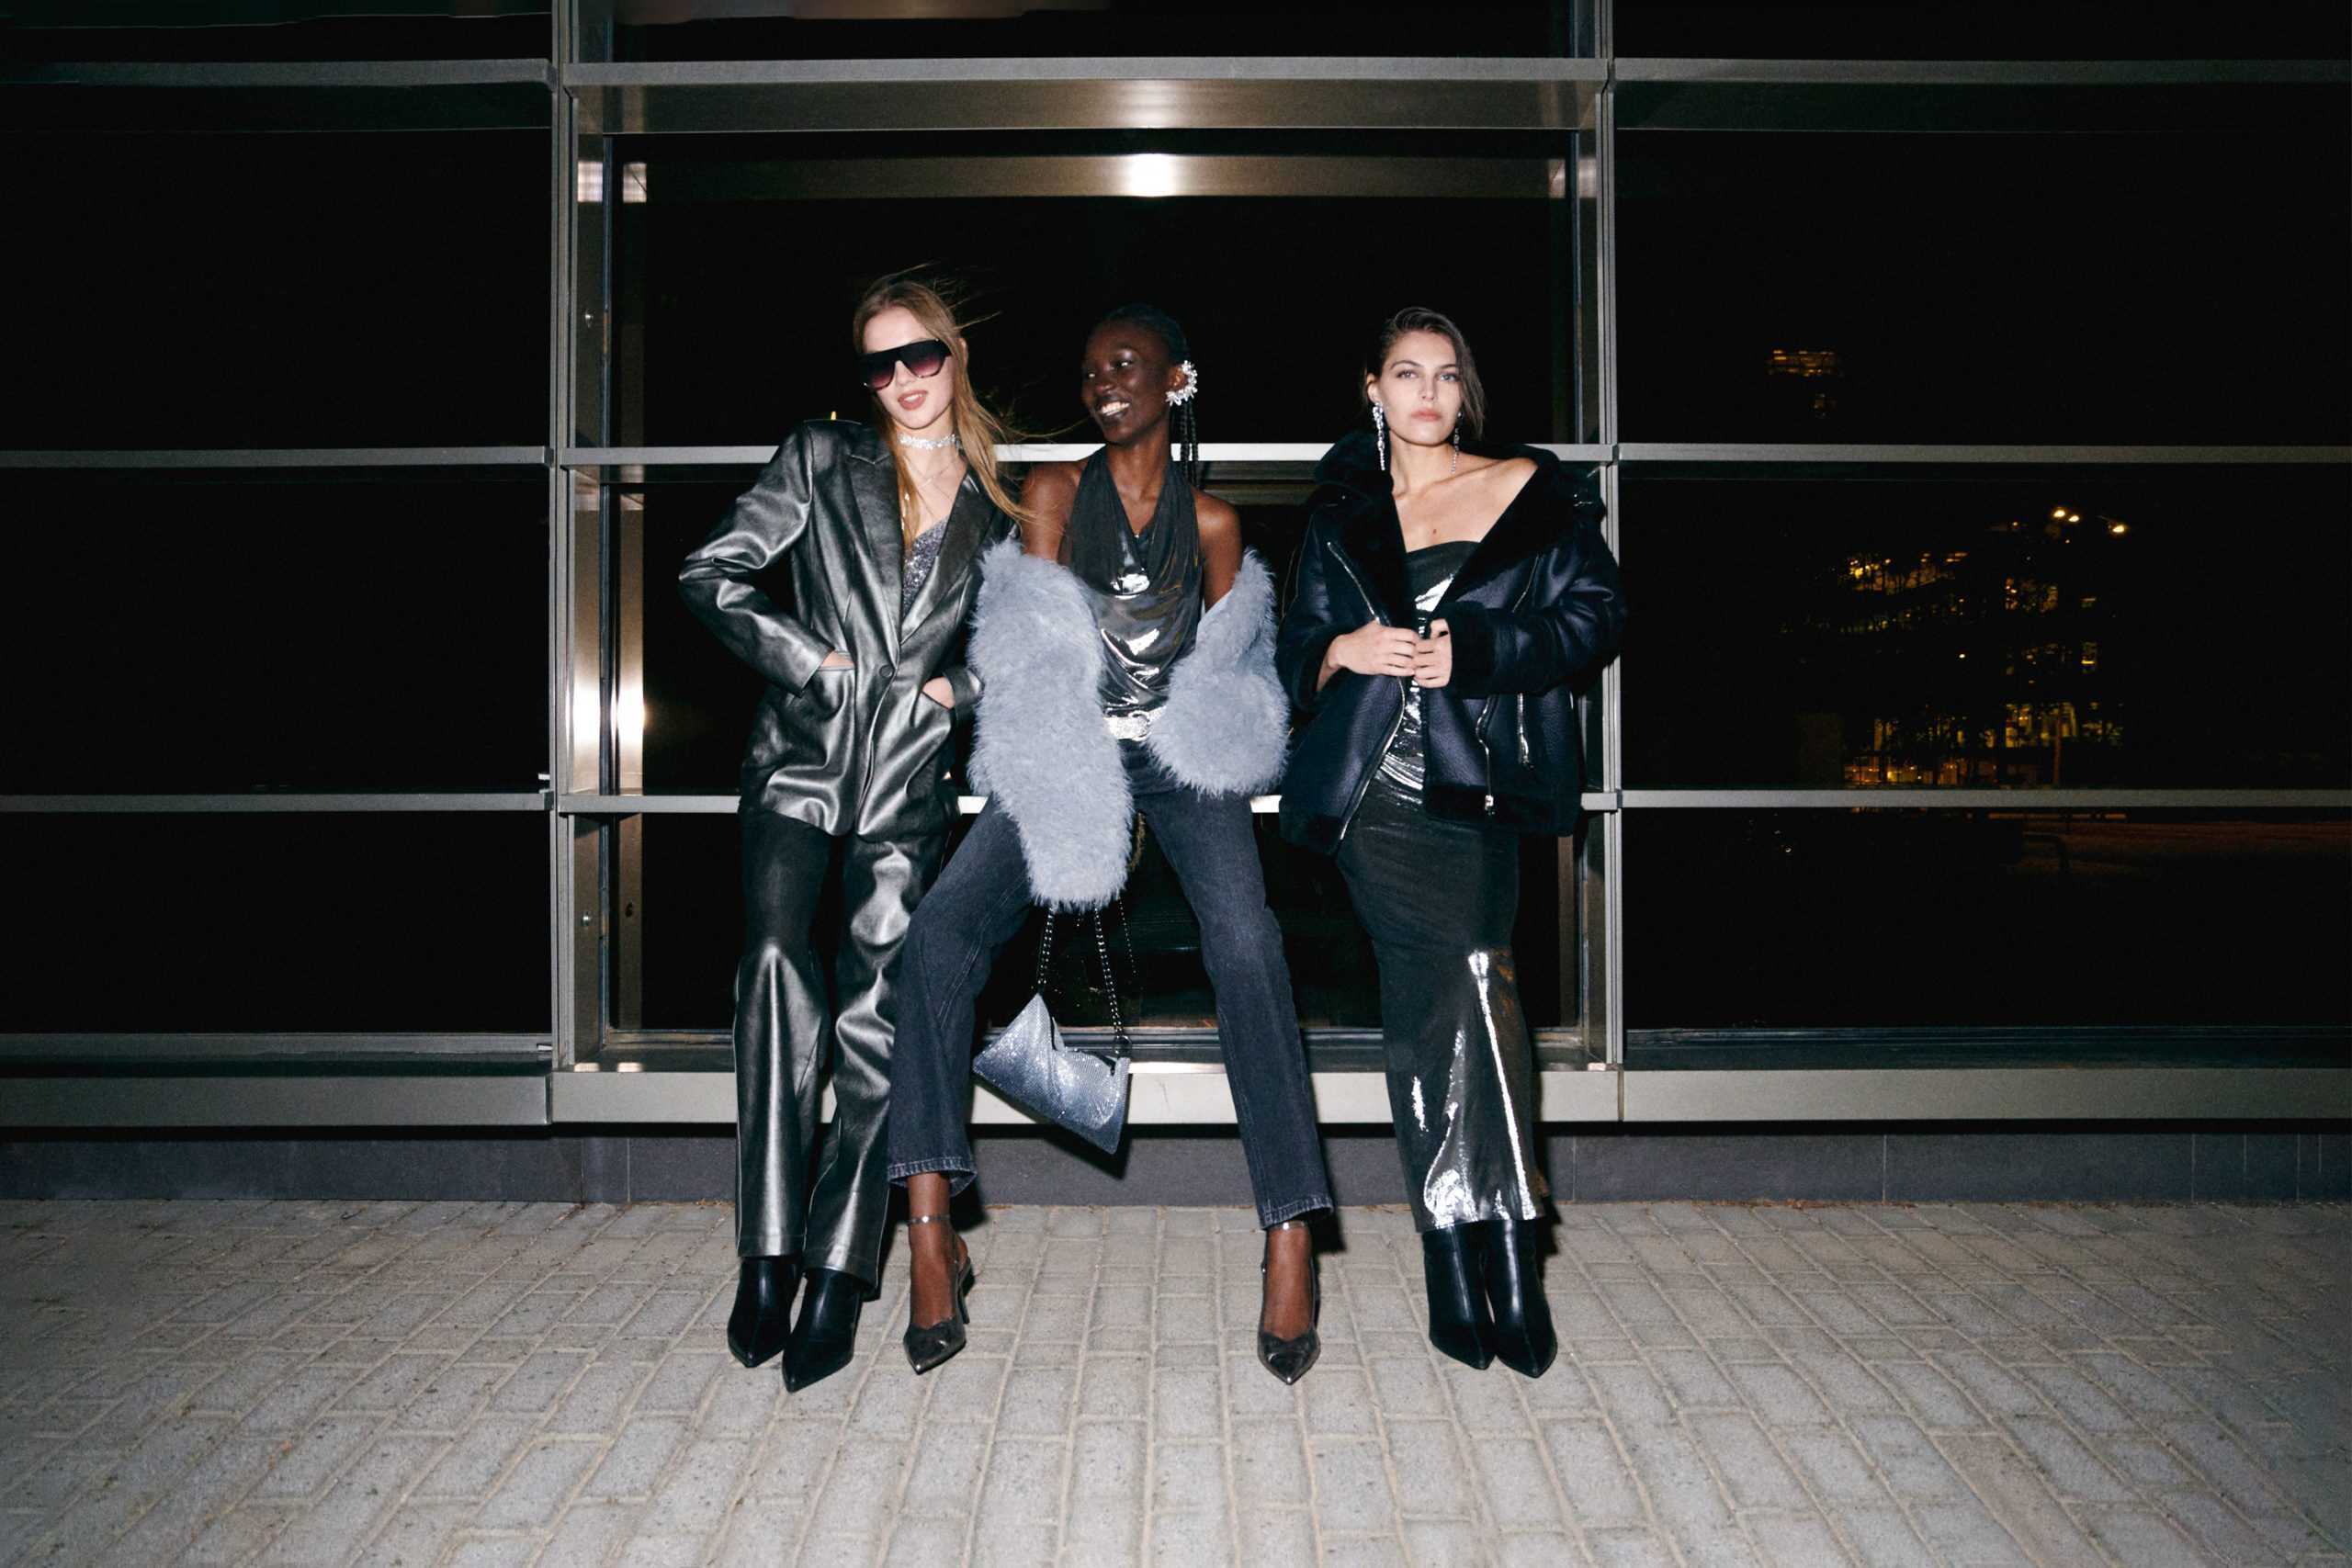 Transparencies and lots of shine: this is the Stradivarius Party